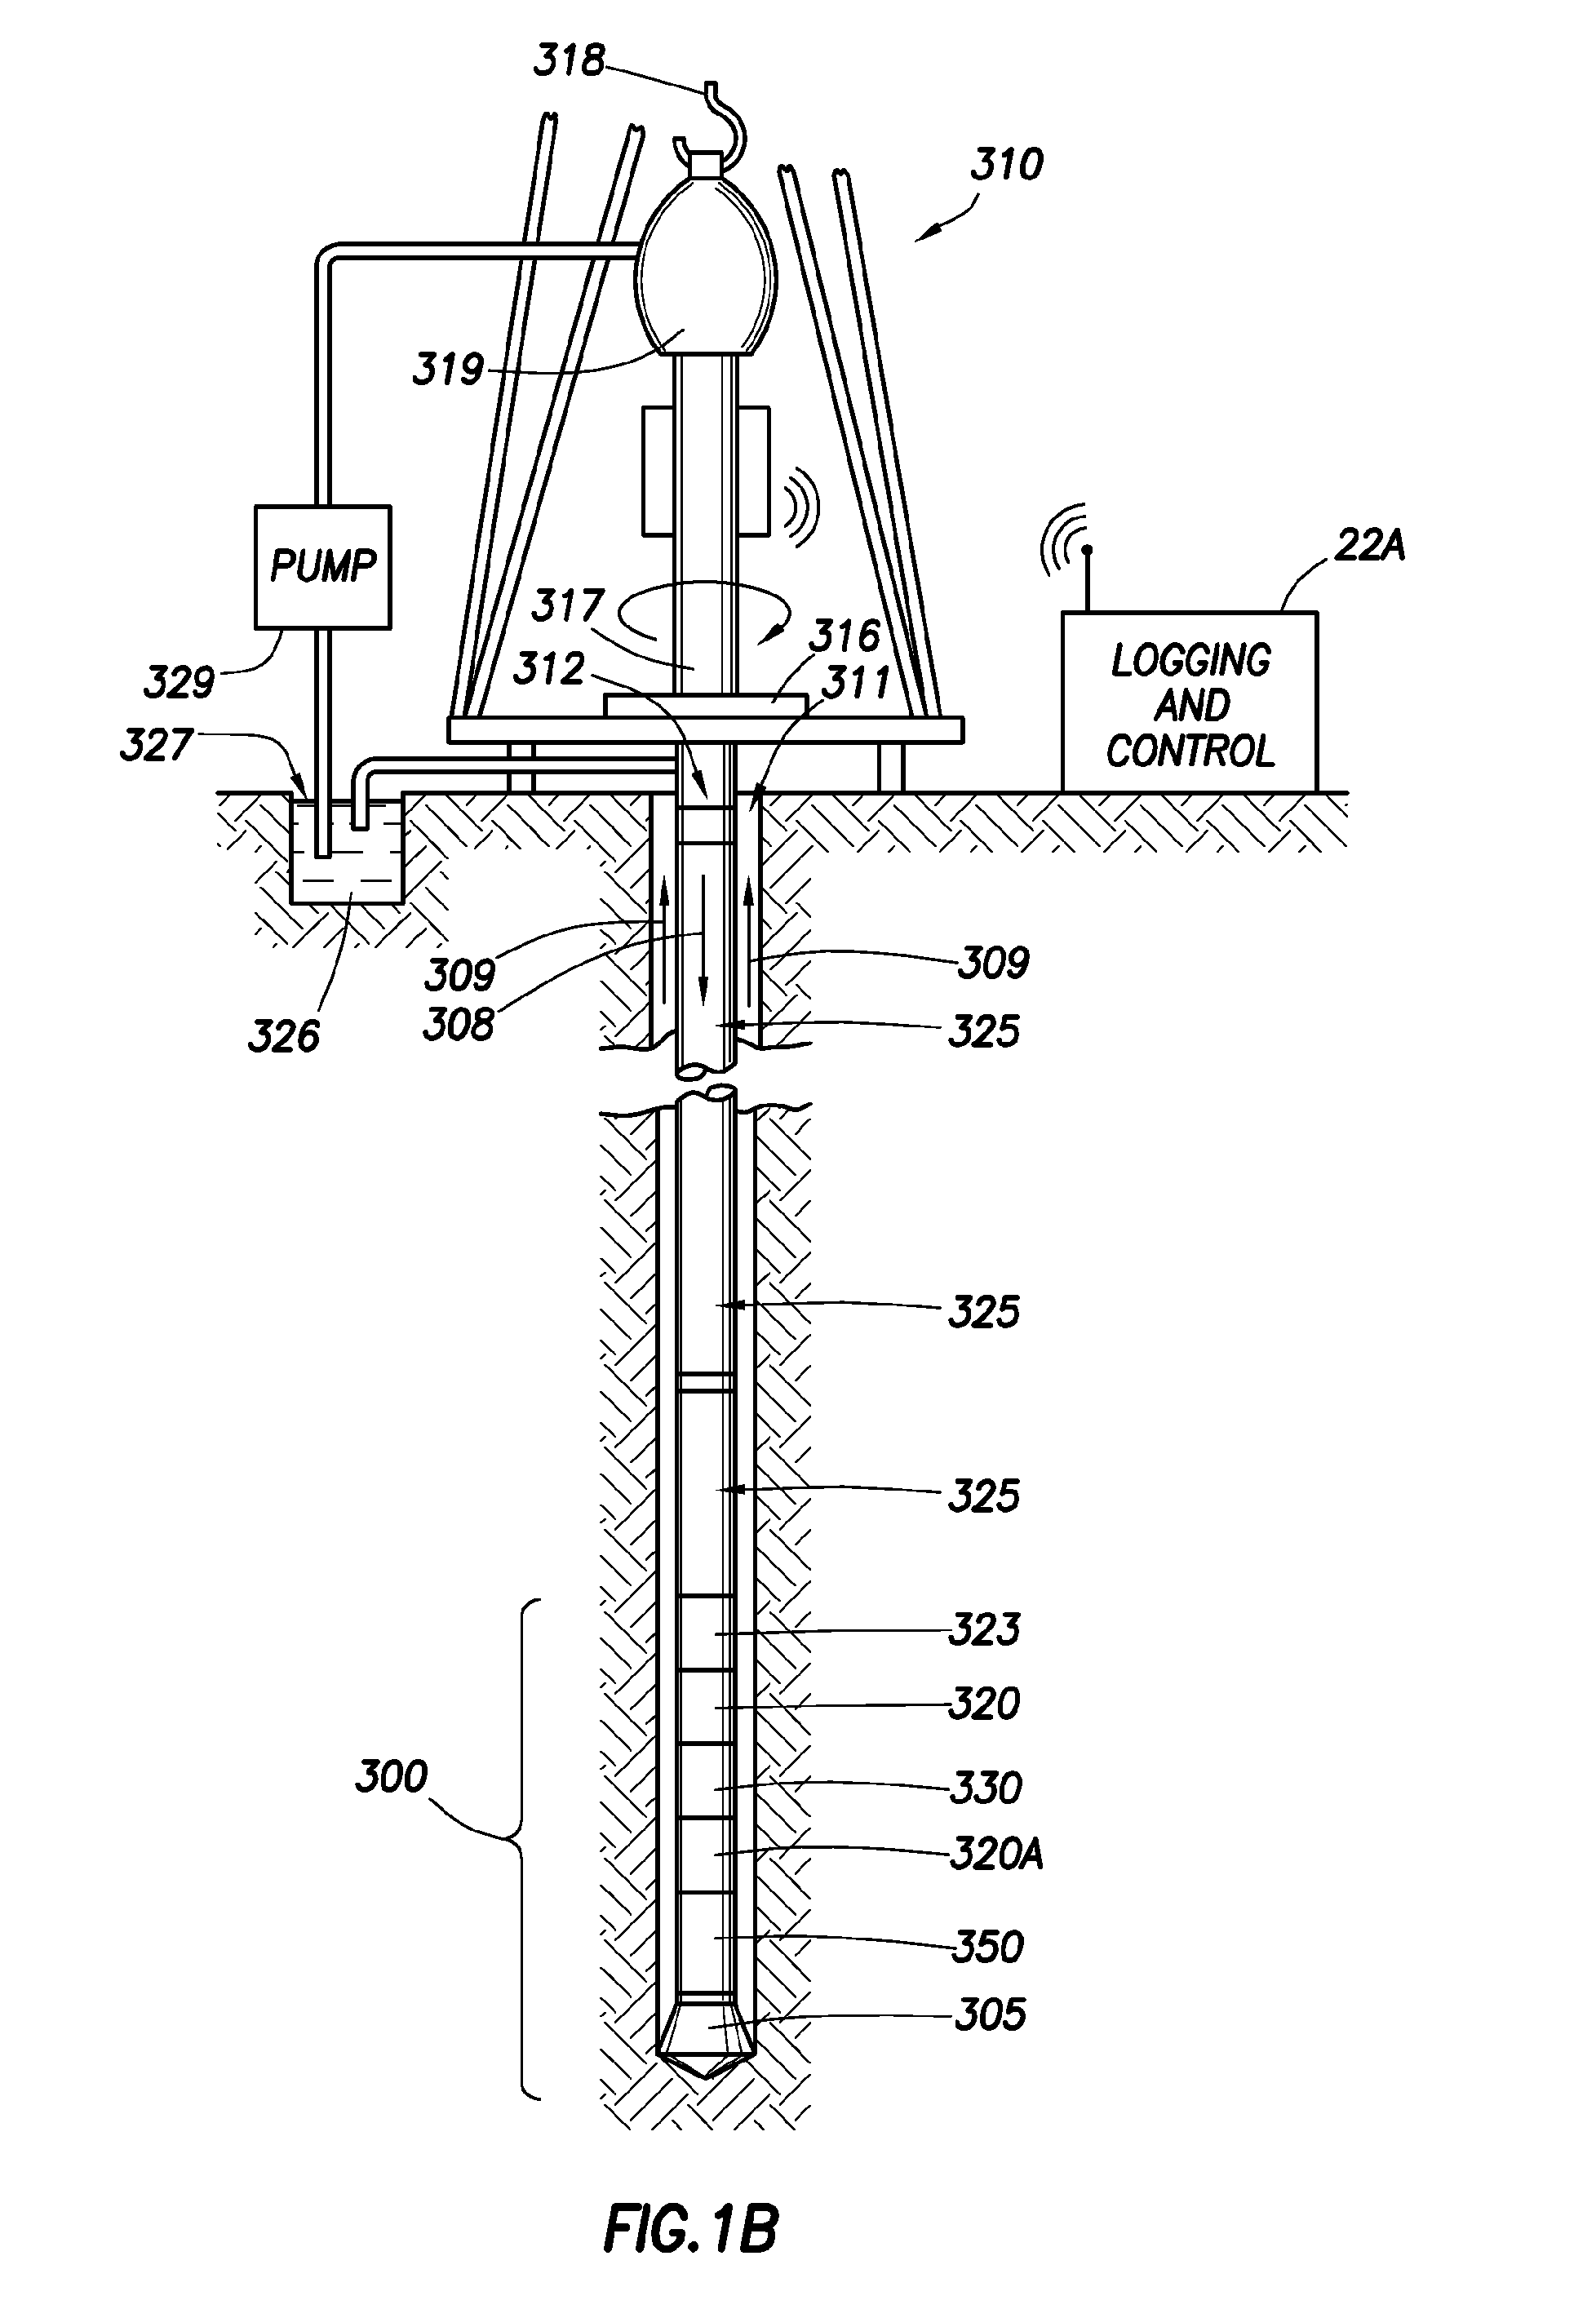 Method for Determining Rock Formation Fluid Interaction Properties Using Nuclear Magnetic Resonance Well Logging Measurements